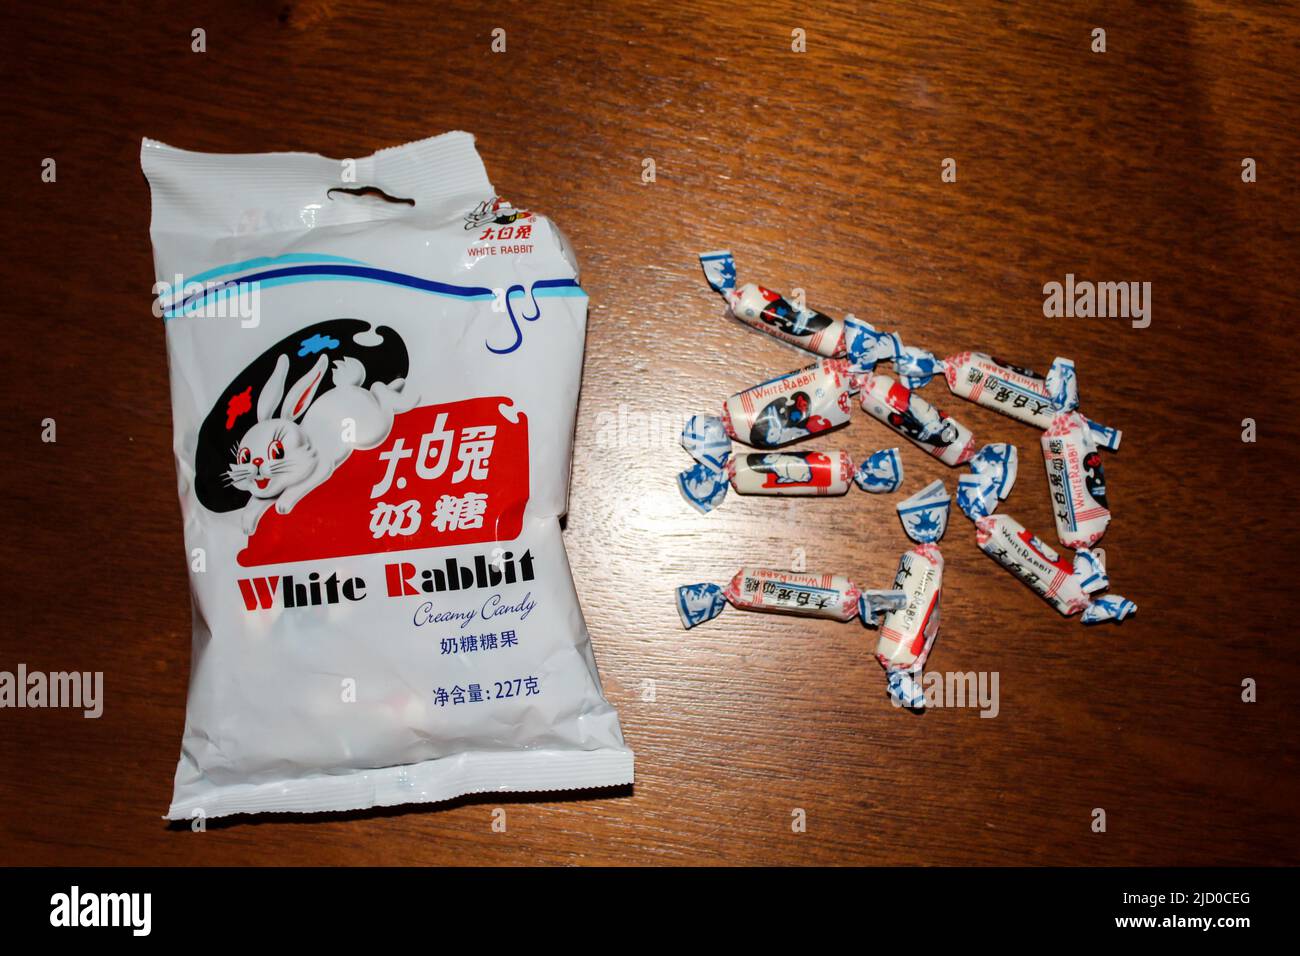 Top view of White Rabbit Creamy Candy which is a brand of milk candy manufactured by Shanghai Guan Sheng Yuan Food, Ltd., in China. Famous candy. Stock Photo